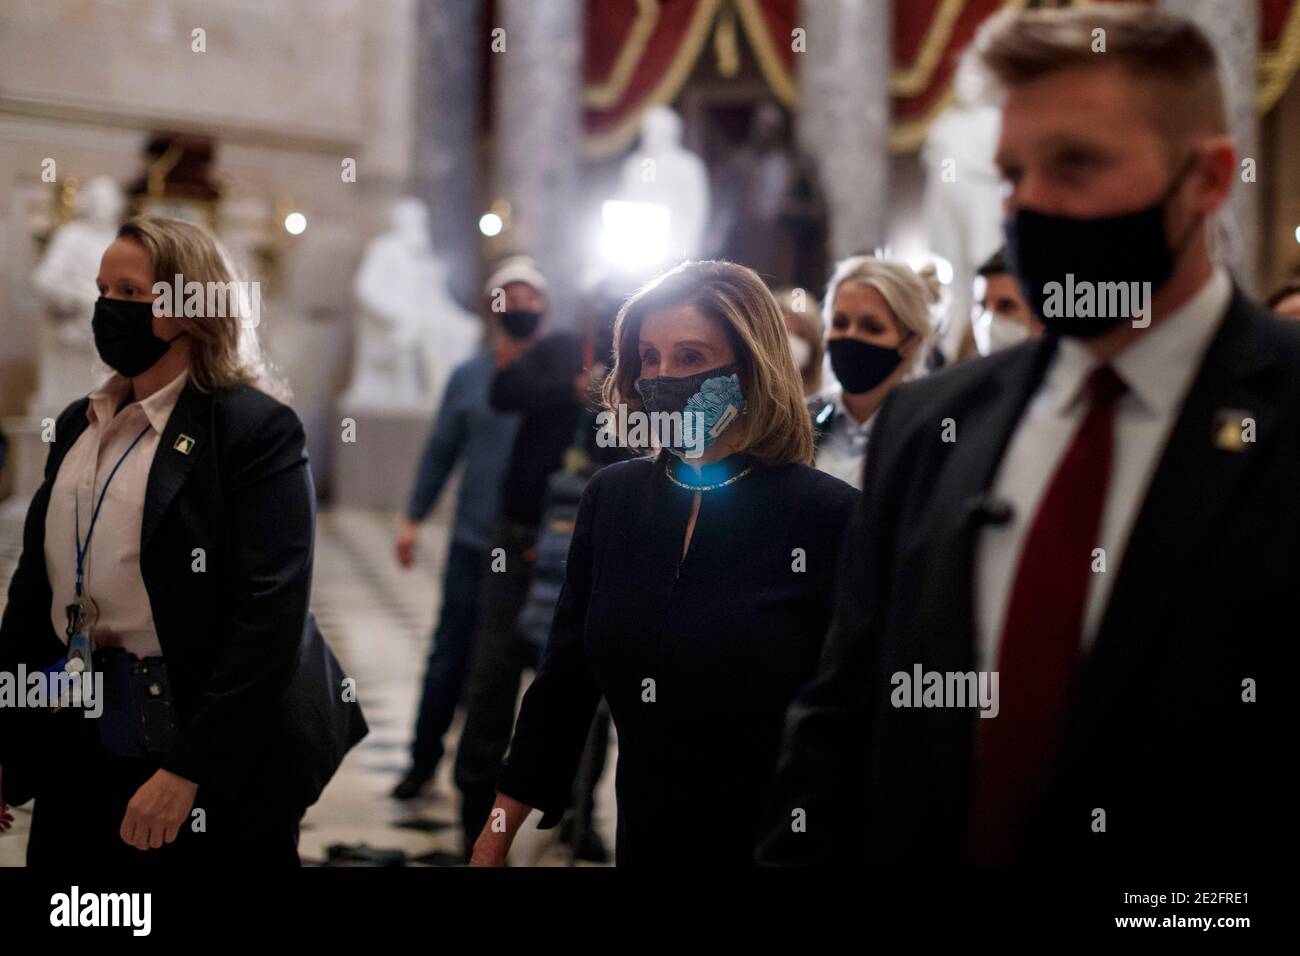 Washington, USA. 14th Jan, 2021. U.S. House Speaker Nancy Pelosi (C) wearing a protective mask walks through the hallways in Capitol Building in Washington, DC, the United States, Jan. 13, 2021. TO GO WITH XINHUA HEADLINES OF JAN. 14, 2021 Credit: Ting Shen/Xinhua/Alamy Live News Stock Photo